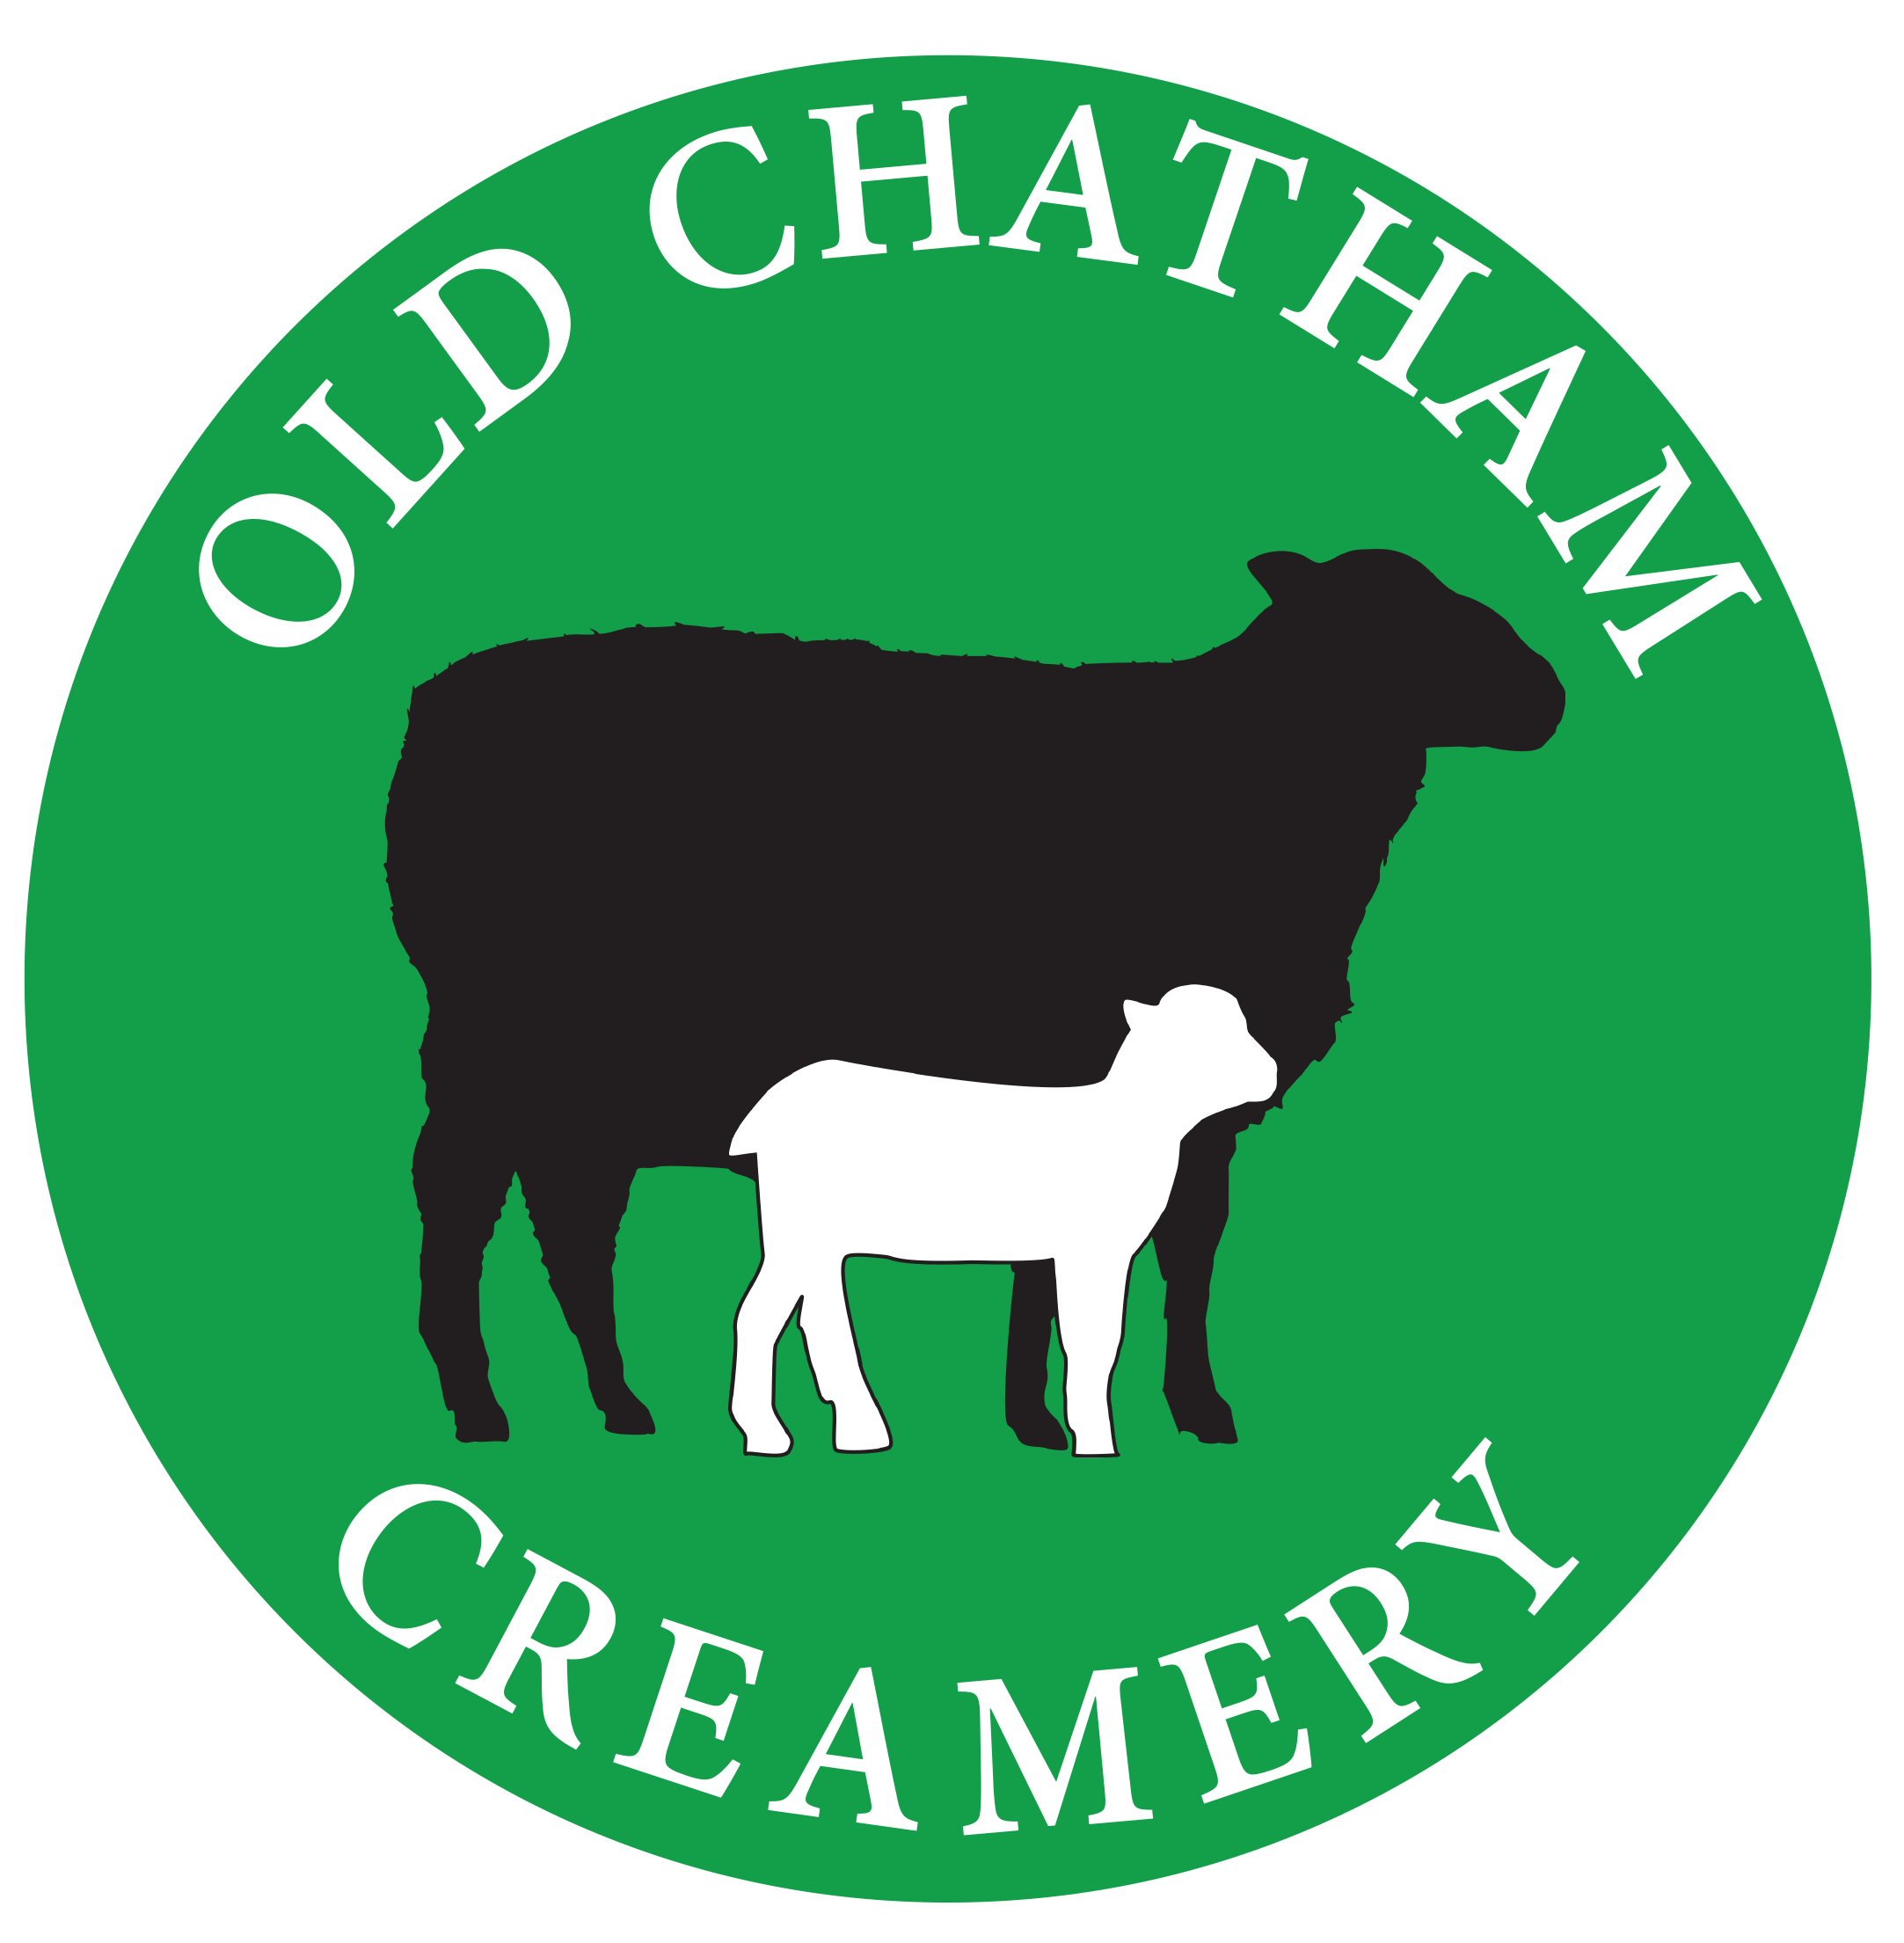 About Old Chatham Creamery